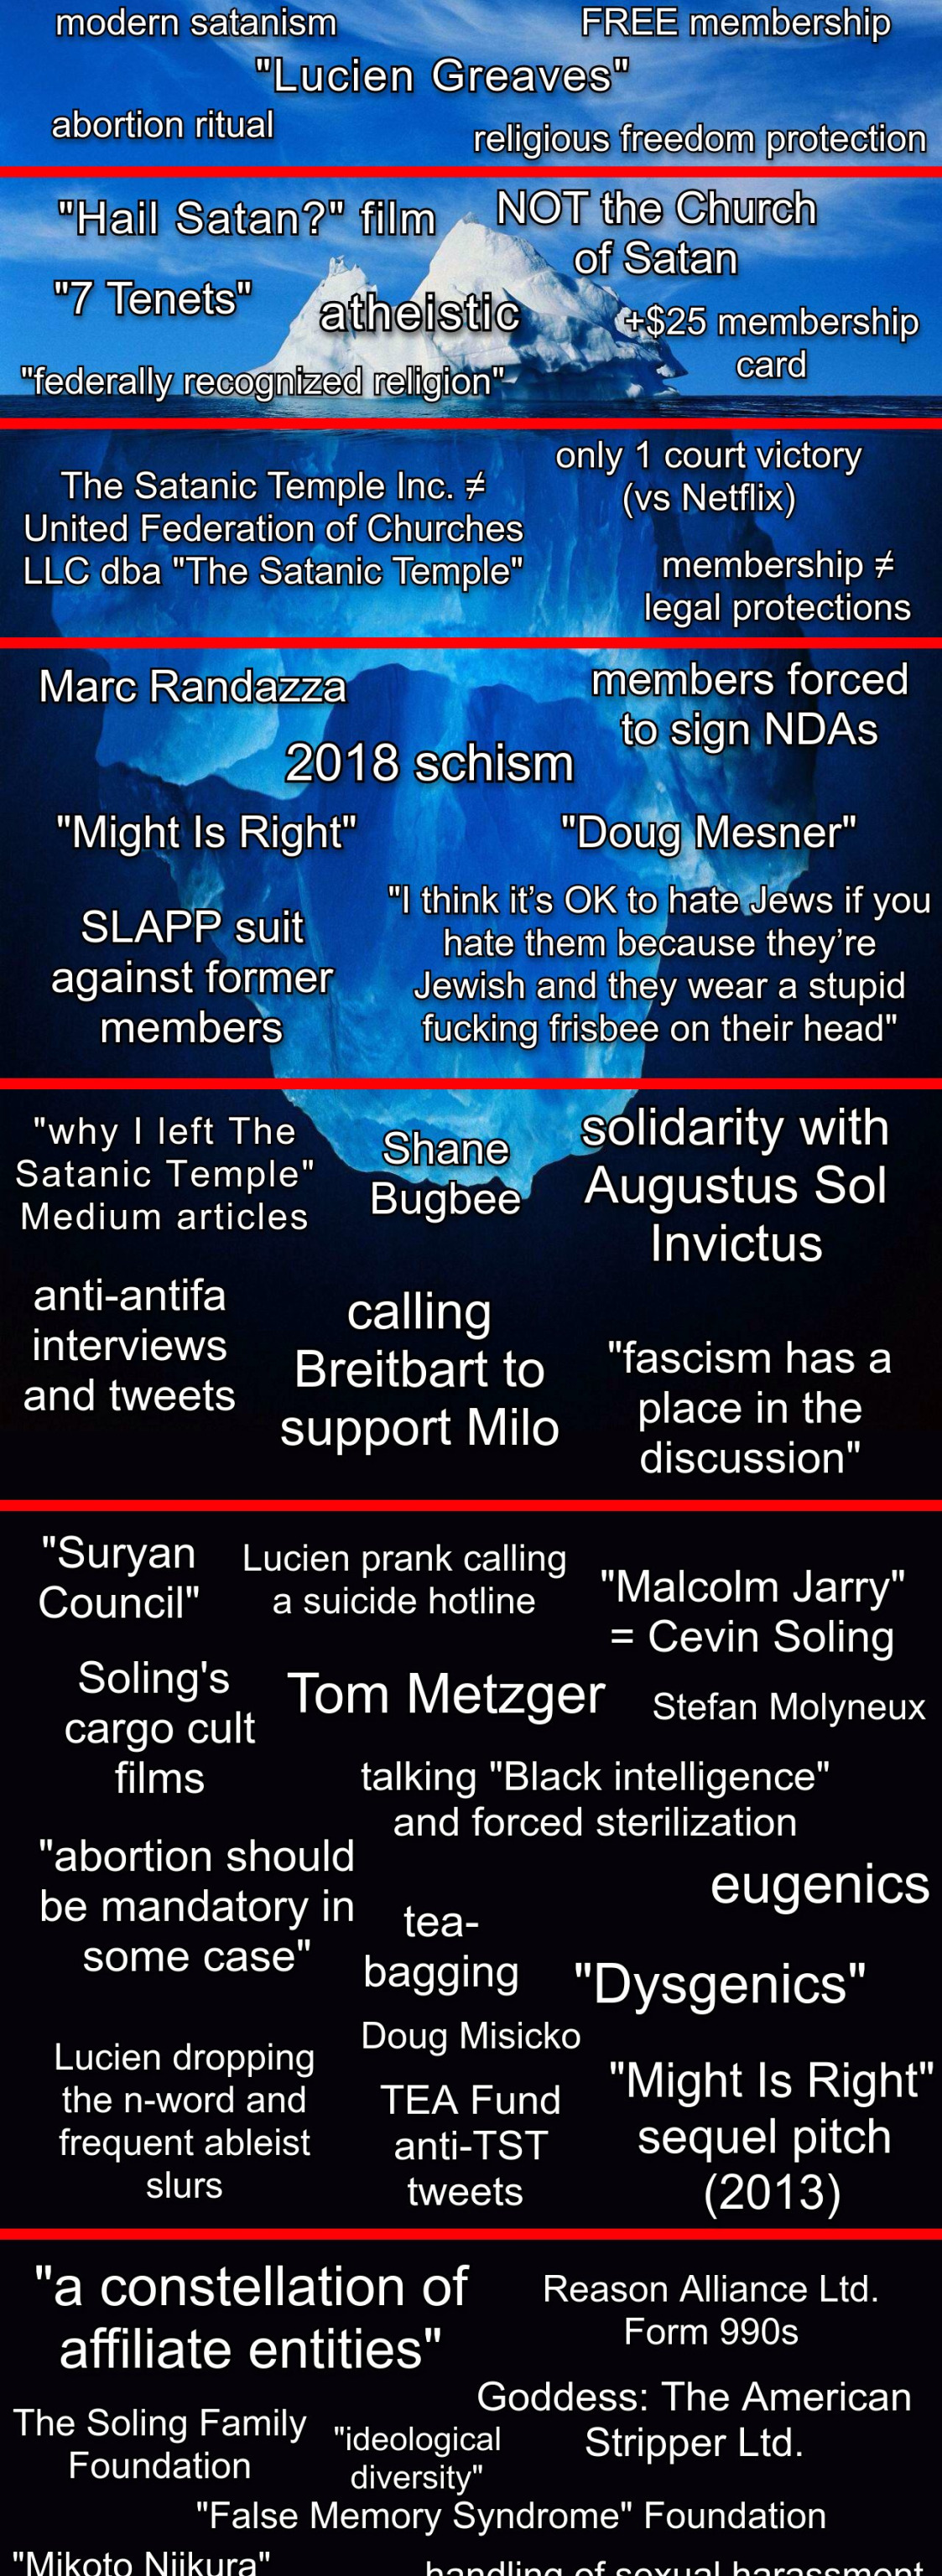 iceberg meme. Top layer: modern satanism, FREE membership, "Lucien Greaves", abortion ritual, religious freedom protection …Next layer: Marc Randazza, members forced to sign NDAs, 2018 schism, "Might Is Right", "Doug Mesner", SLAPP suit against former members, "I think it's OK to hate Jews …" Next layer: "why I left The Satanic Temple" Medium articles, Shane Bugbee, solidarity with Augustus Sol Invictus, anti-antifa interviews and tweets, calling Breitbart to support Milo, "fascism has a place in the discussion" Next layer: "Suryan Council", Lucien prank calling a suicide hotline, "Malcolm Jarry" = Cevin Soling, Soling's cargo cult film, Tom Metzger, Stefan Molyneux, talking "Black intelligence" and forced sterilization, tea-bagging, Doug Misicko, "Dysgenics", Lucien dropping the n-word…, "Might Is Right" sequel pitch (2013) Final layer: "a constellation of affiliate entities", Reason Alliance Ltd. Form 990s, Goddess: The American Stripper Ltd…